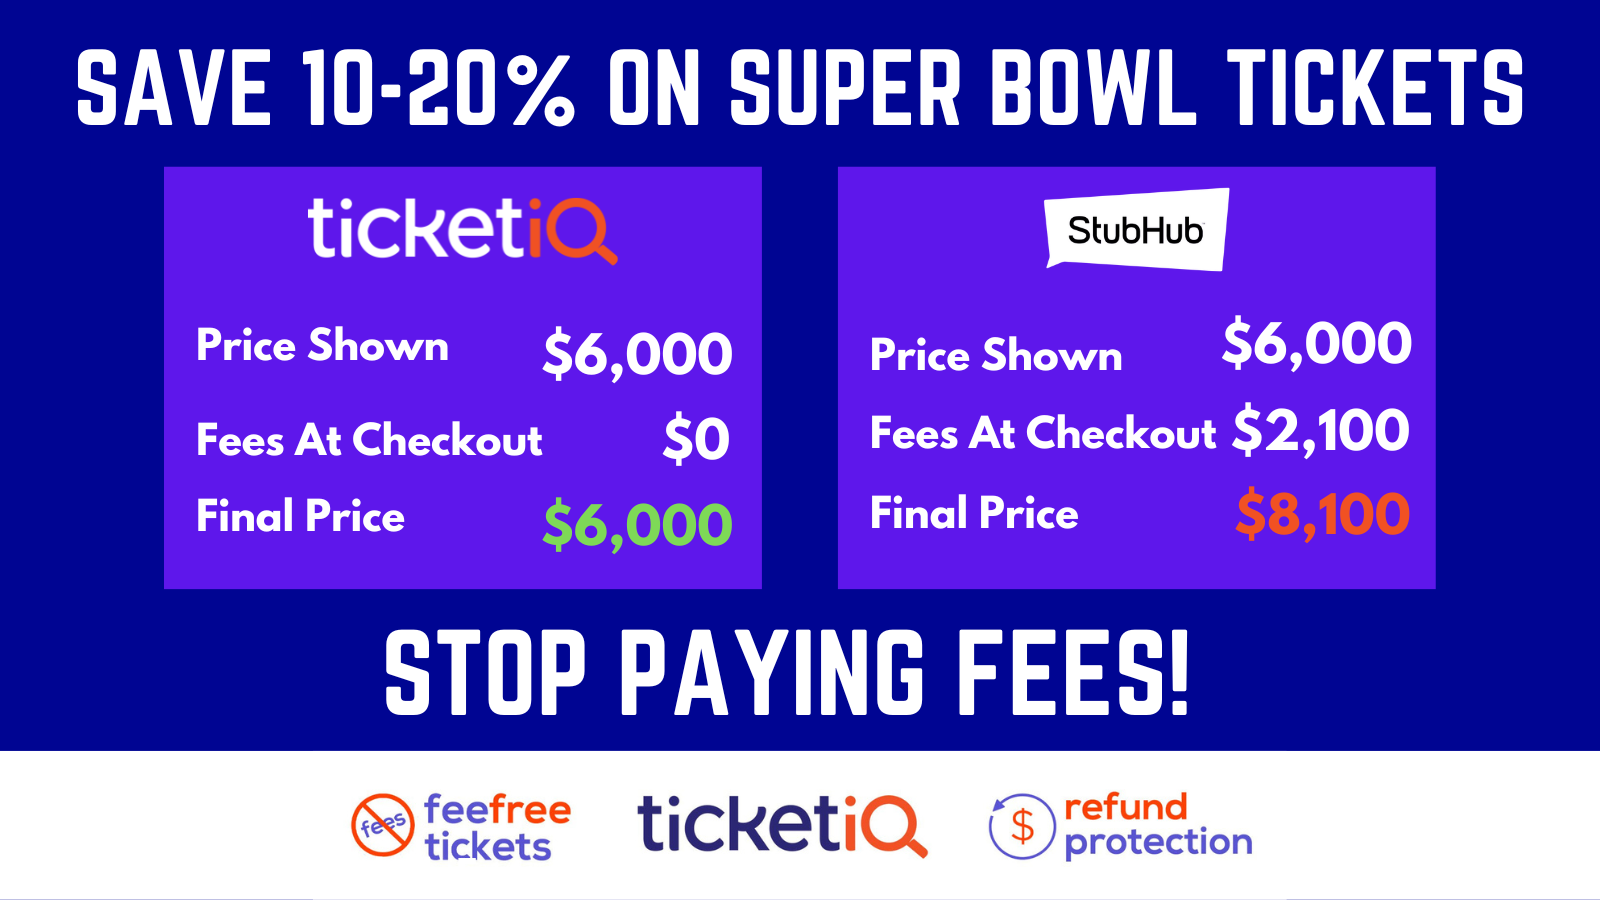 Super Bowl 58 (LVIII) Tickets Buying Guide: How To Find The